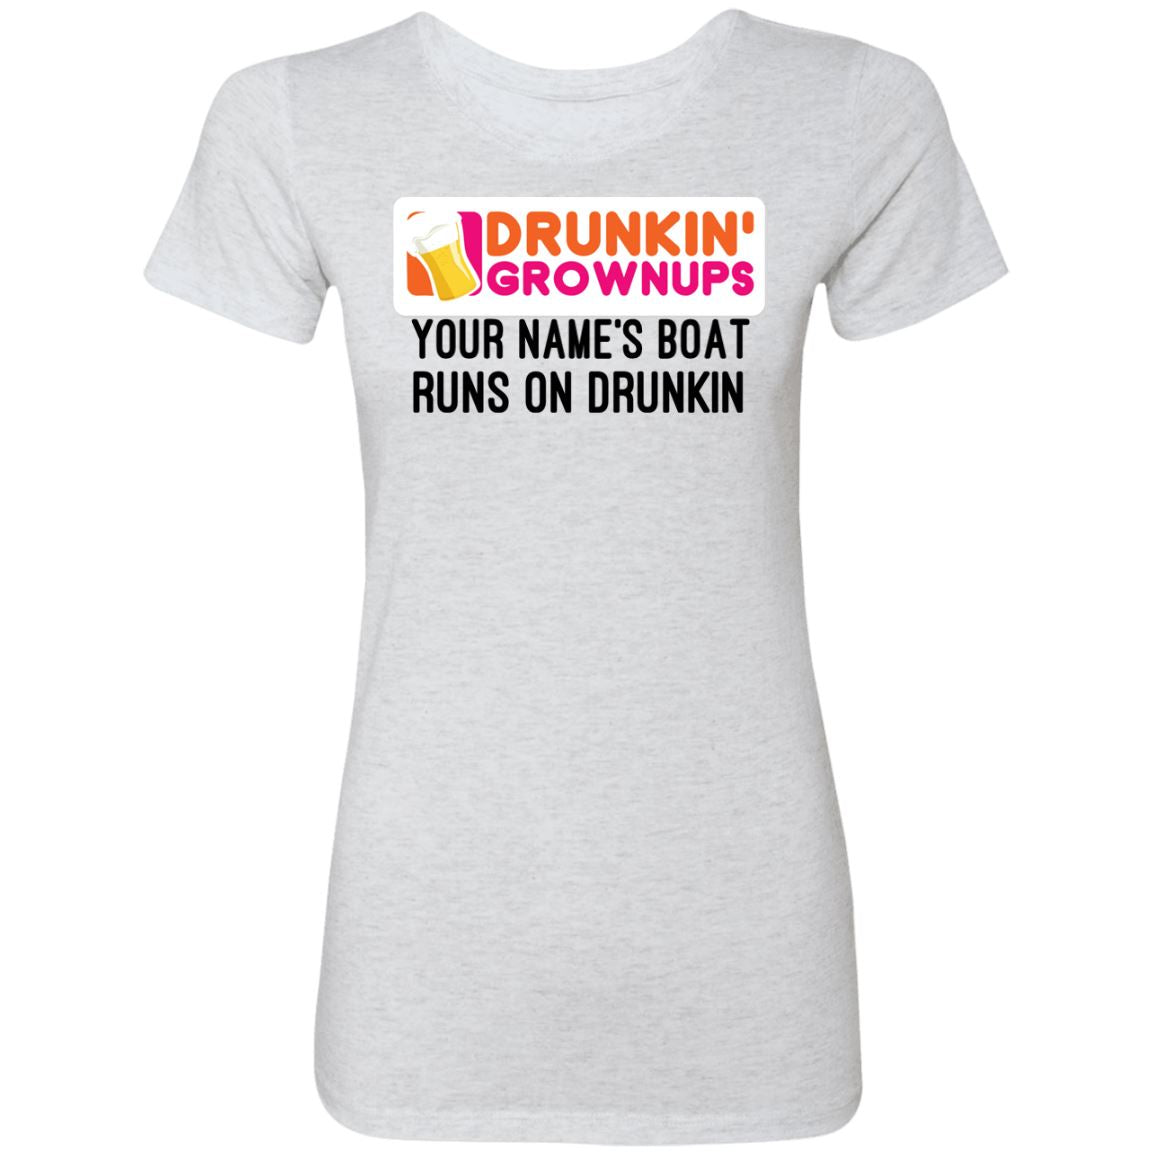 Drunkin Grownups PERSONALIZED Men's and Women's Tanks and Tee's Apparel NL6710 Ladies' Triblend T-Shirt1 Heather White S